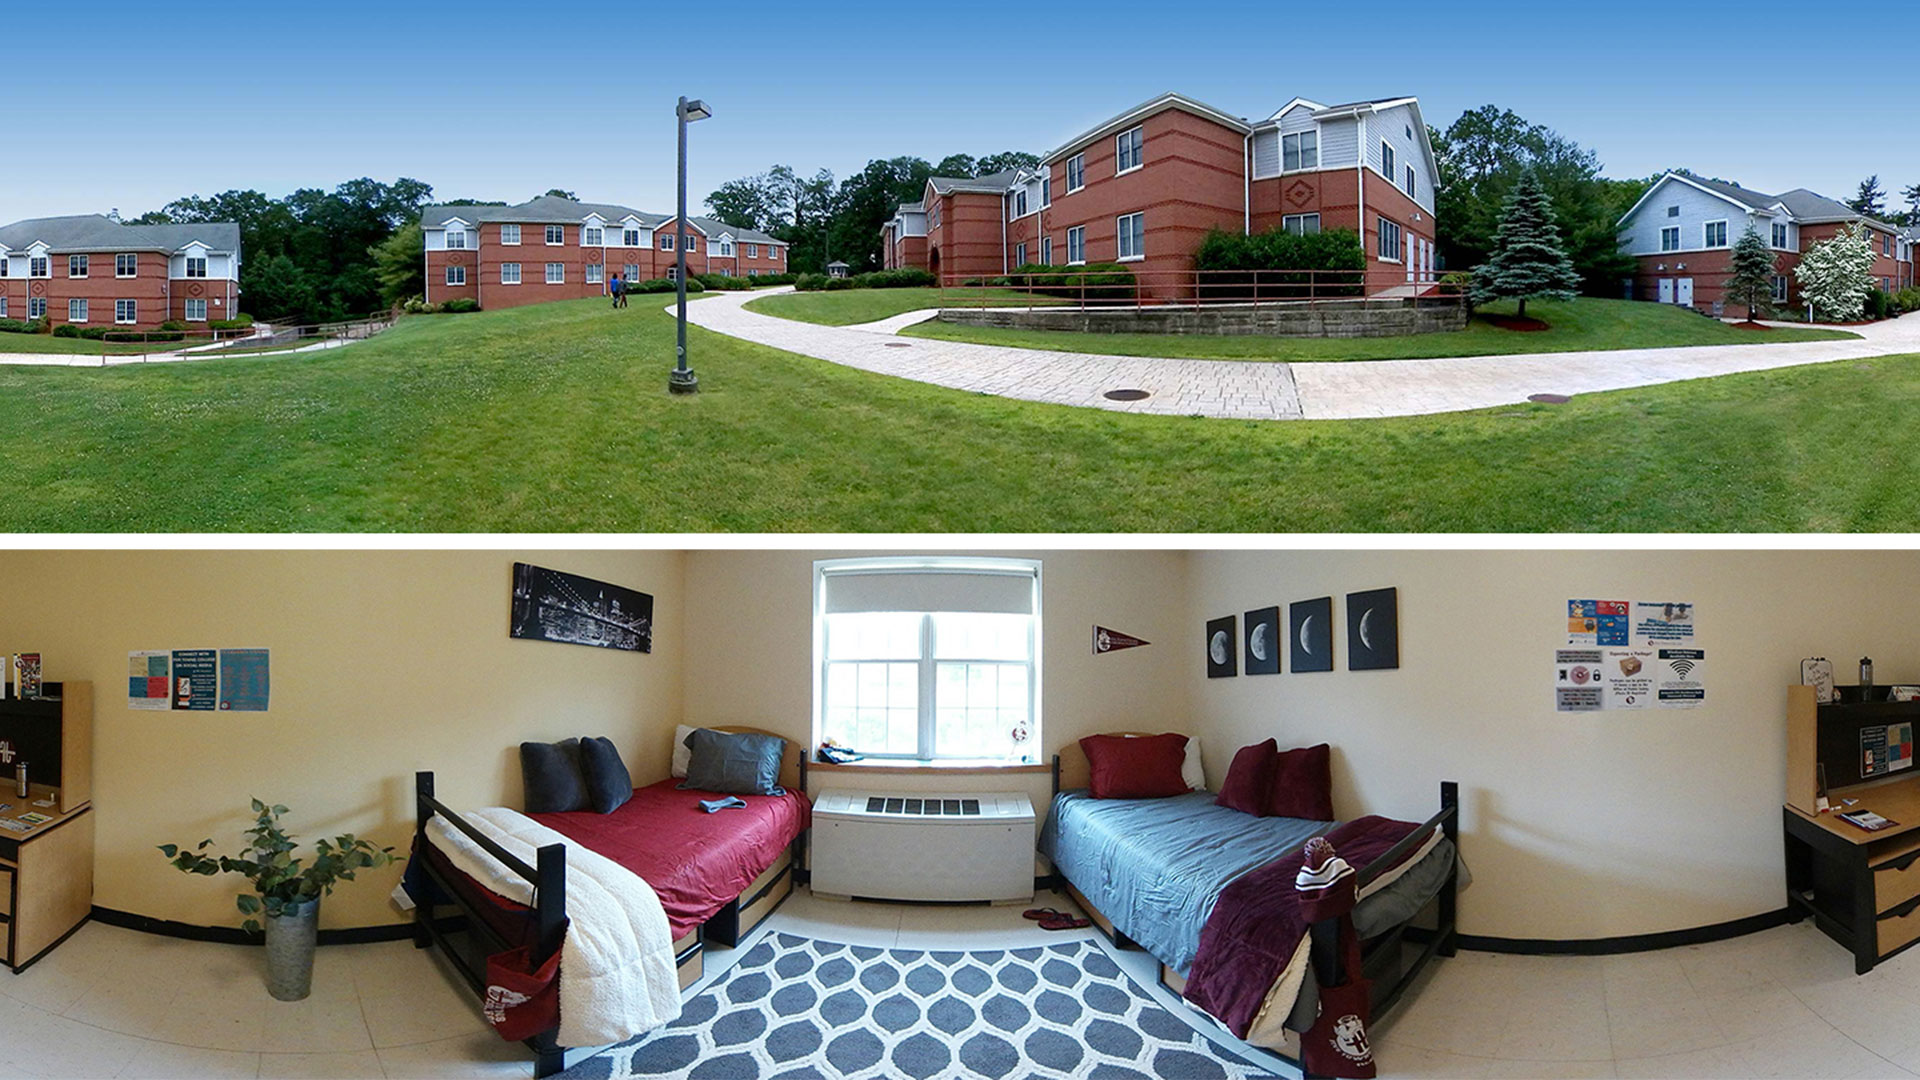 Residence Halls - Five Towns College